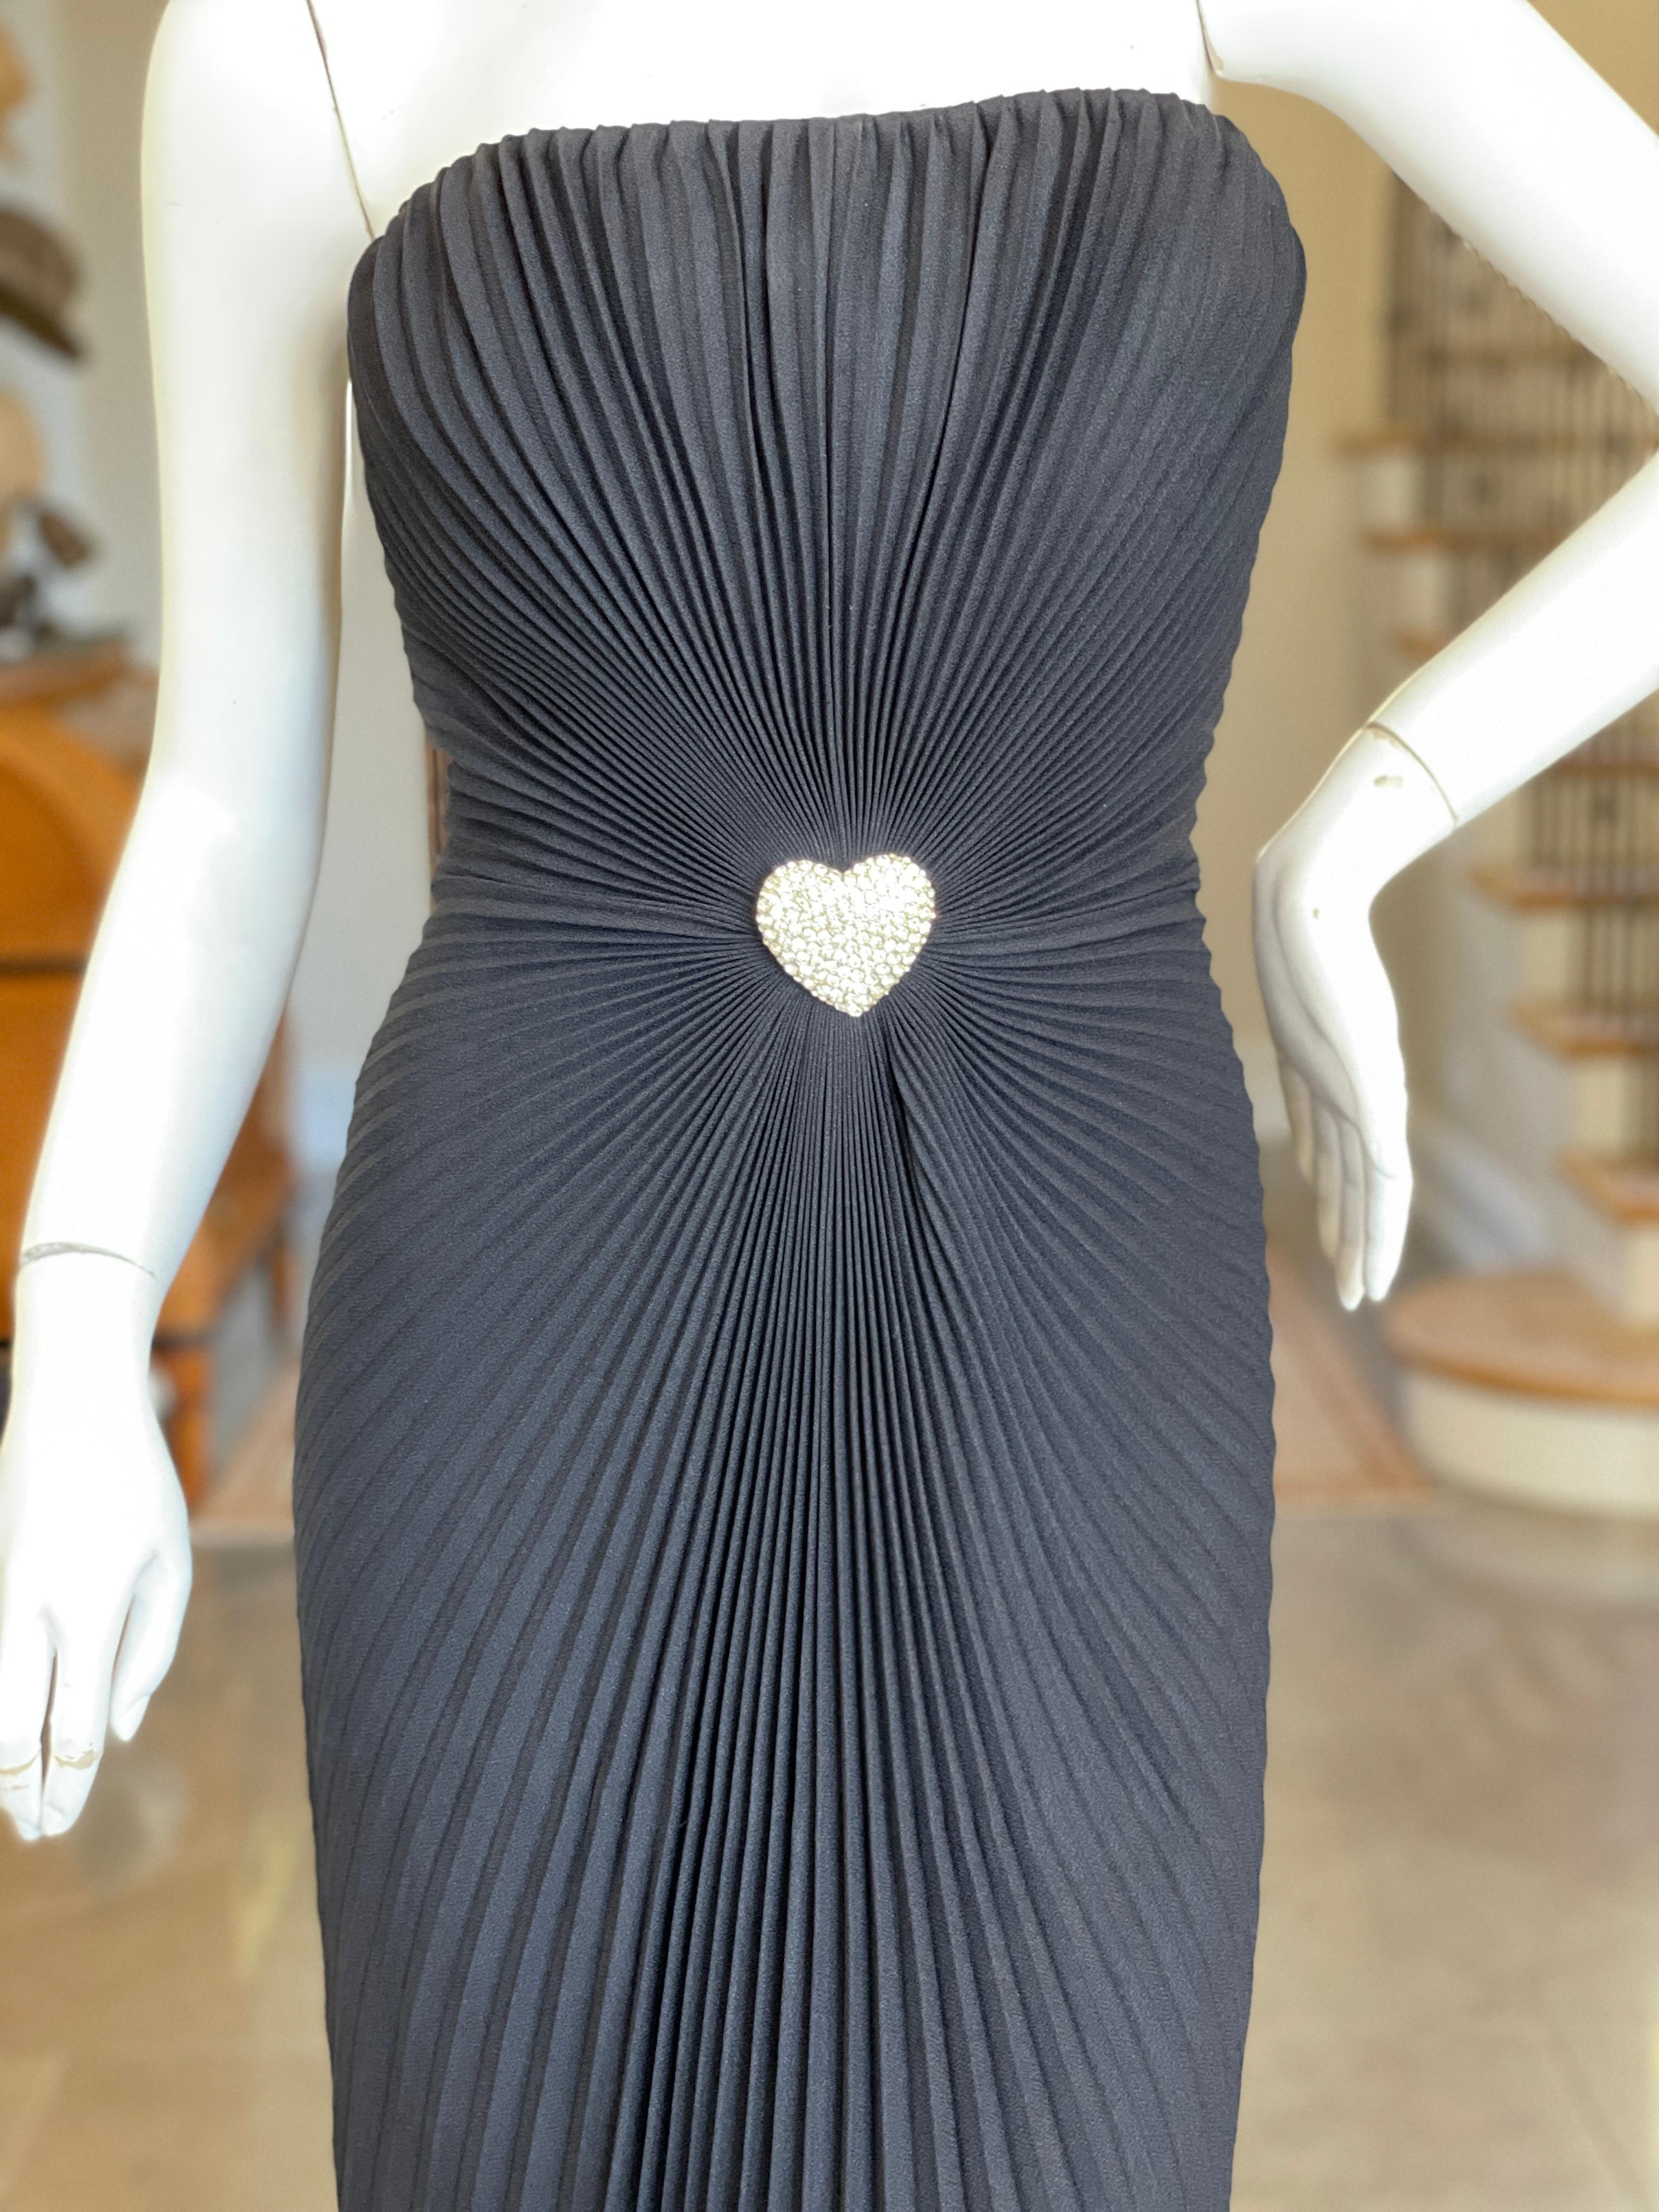 Loris Azzaro Couture 80's Strapless Pleated Evening Dress w Crystal Heart Accent For Sale 2